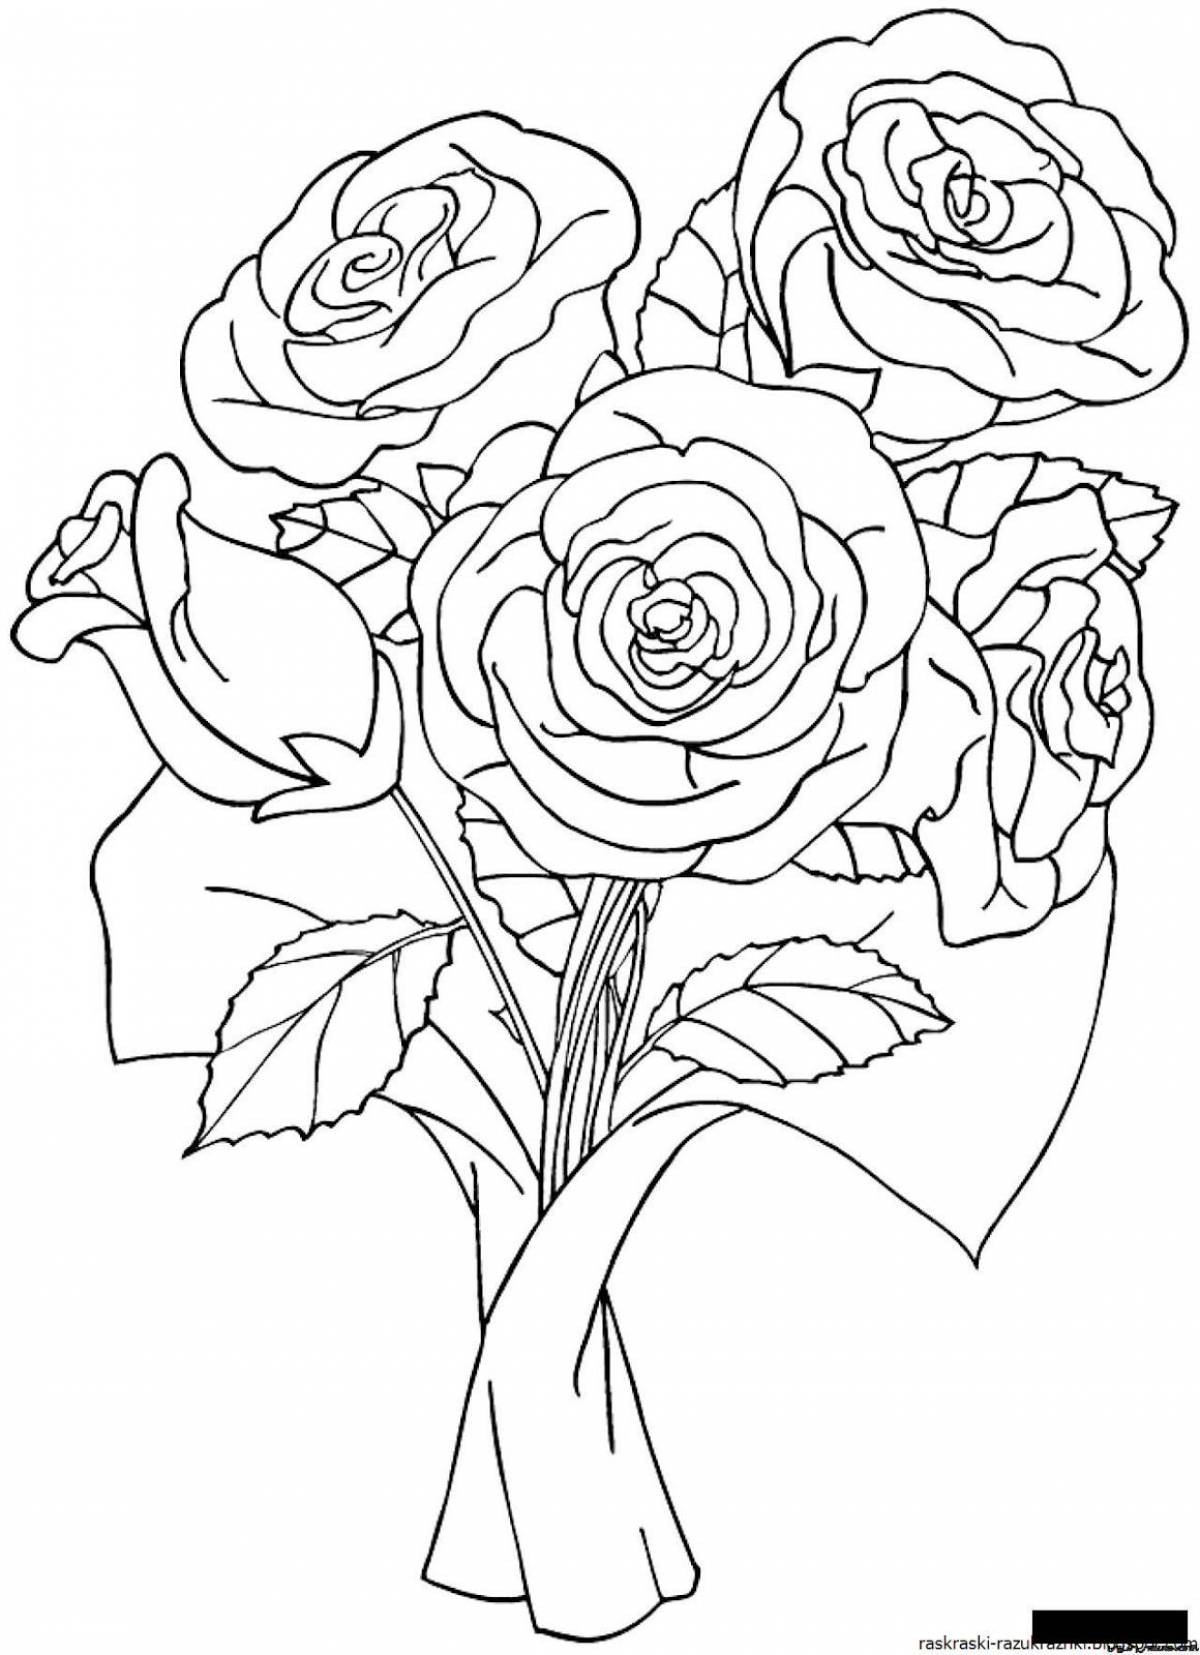 Dazzling rose coloring page